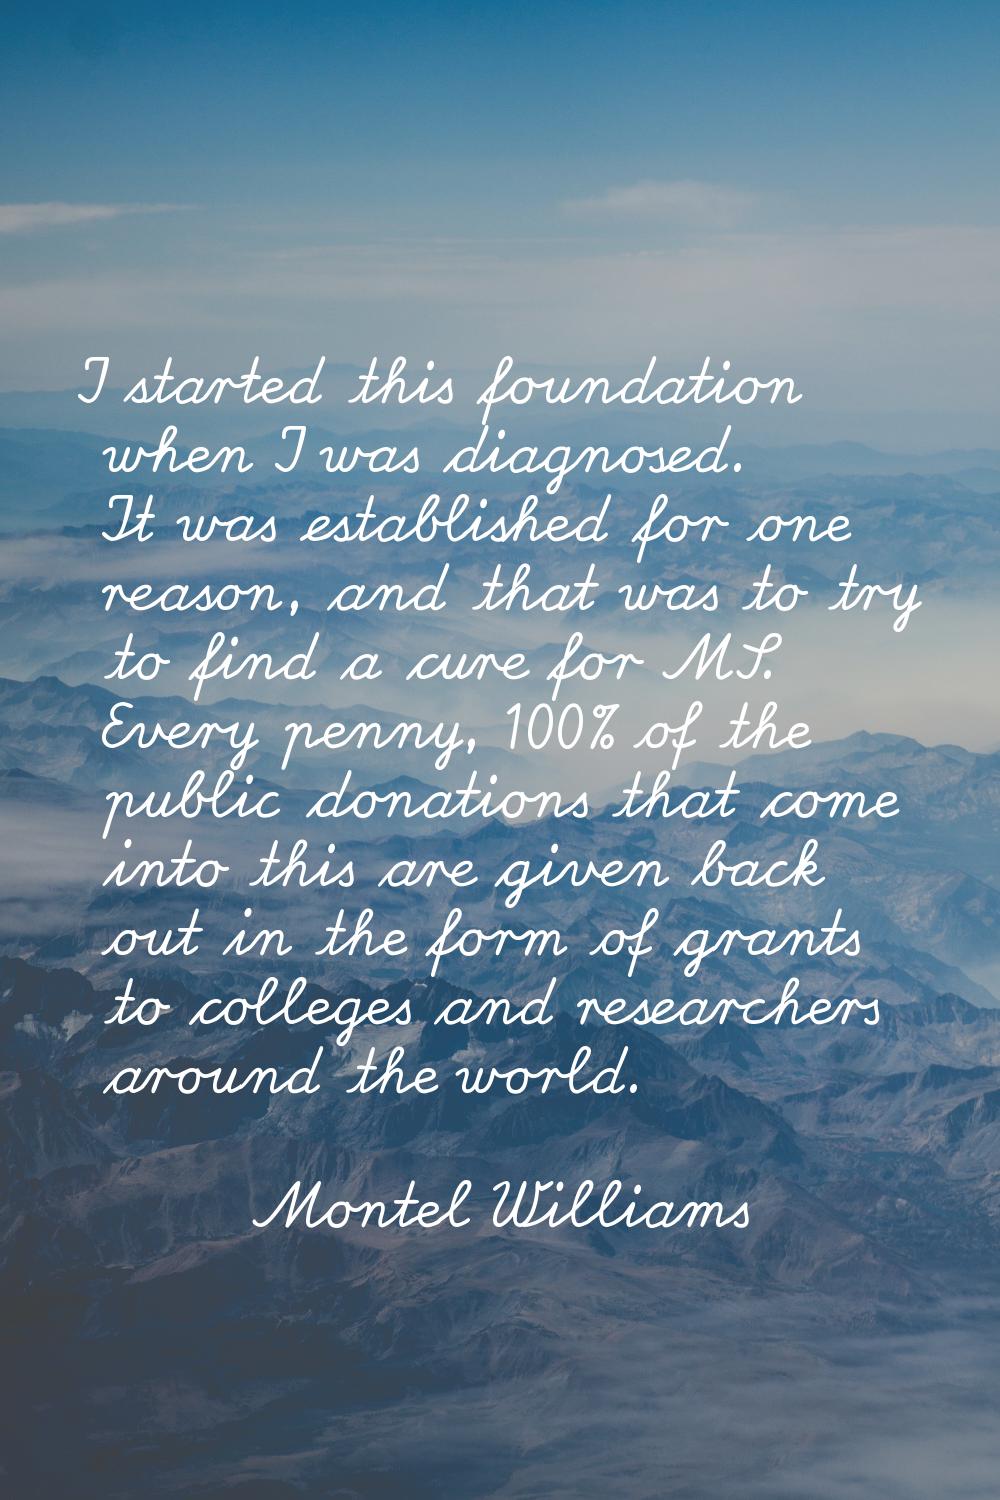 I started this foundation when I was diagnosed. It was established for one reason, and that was to 